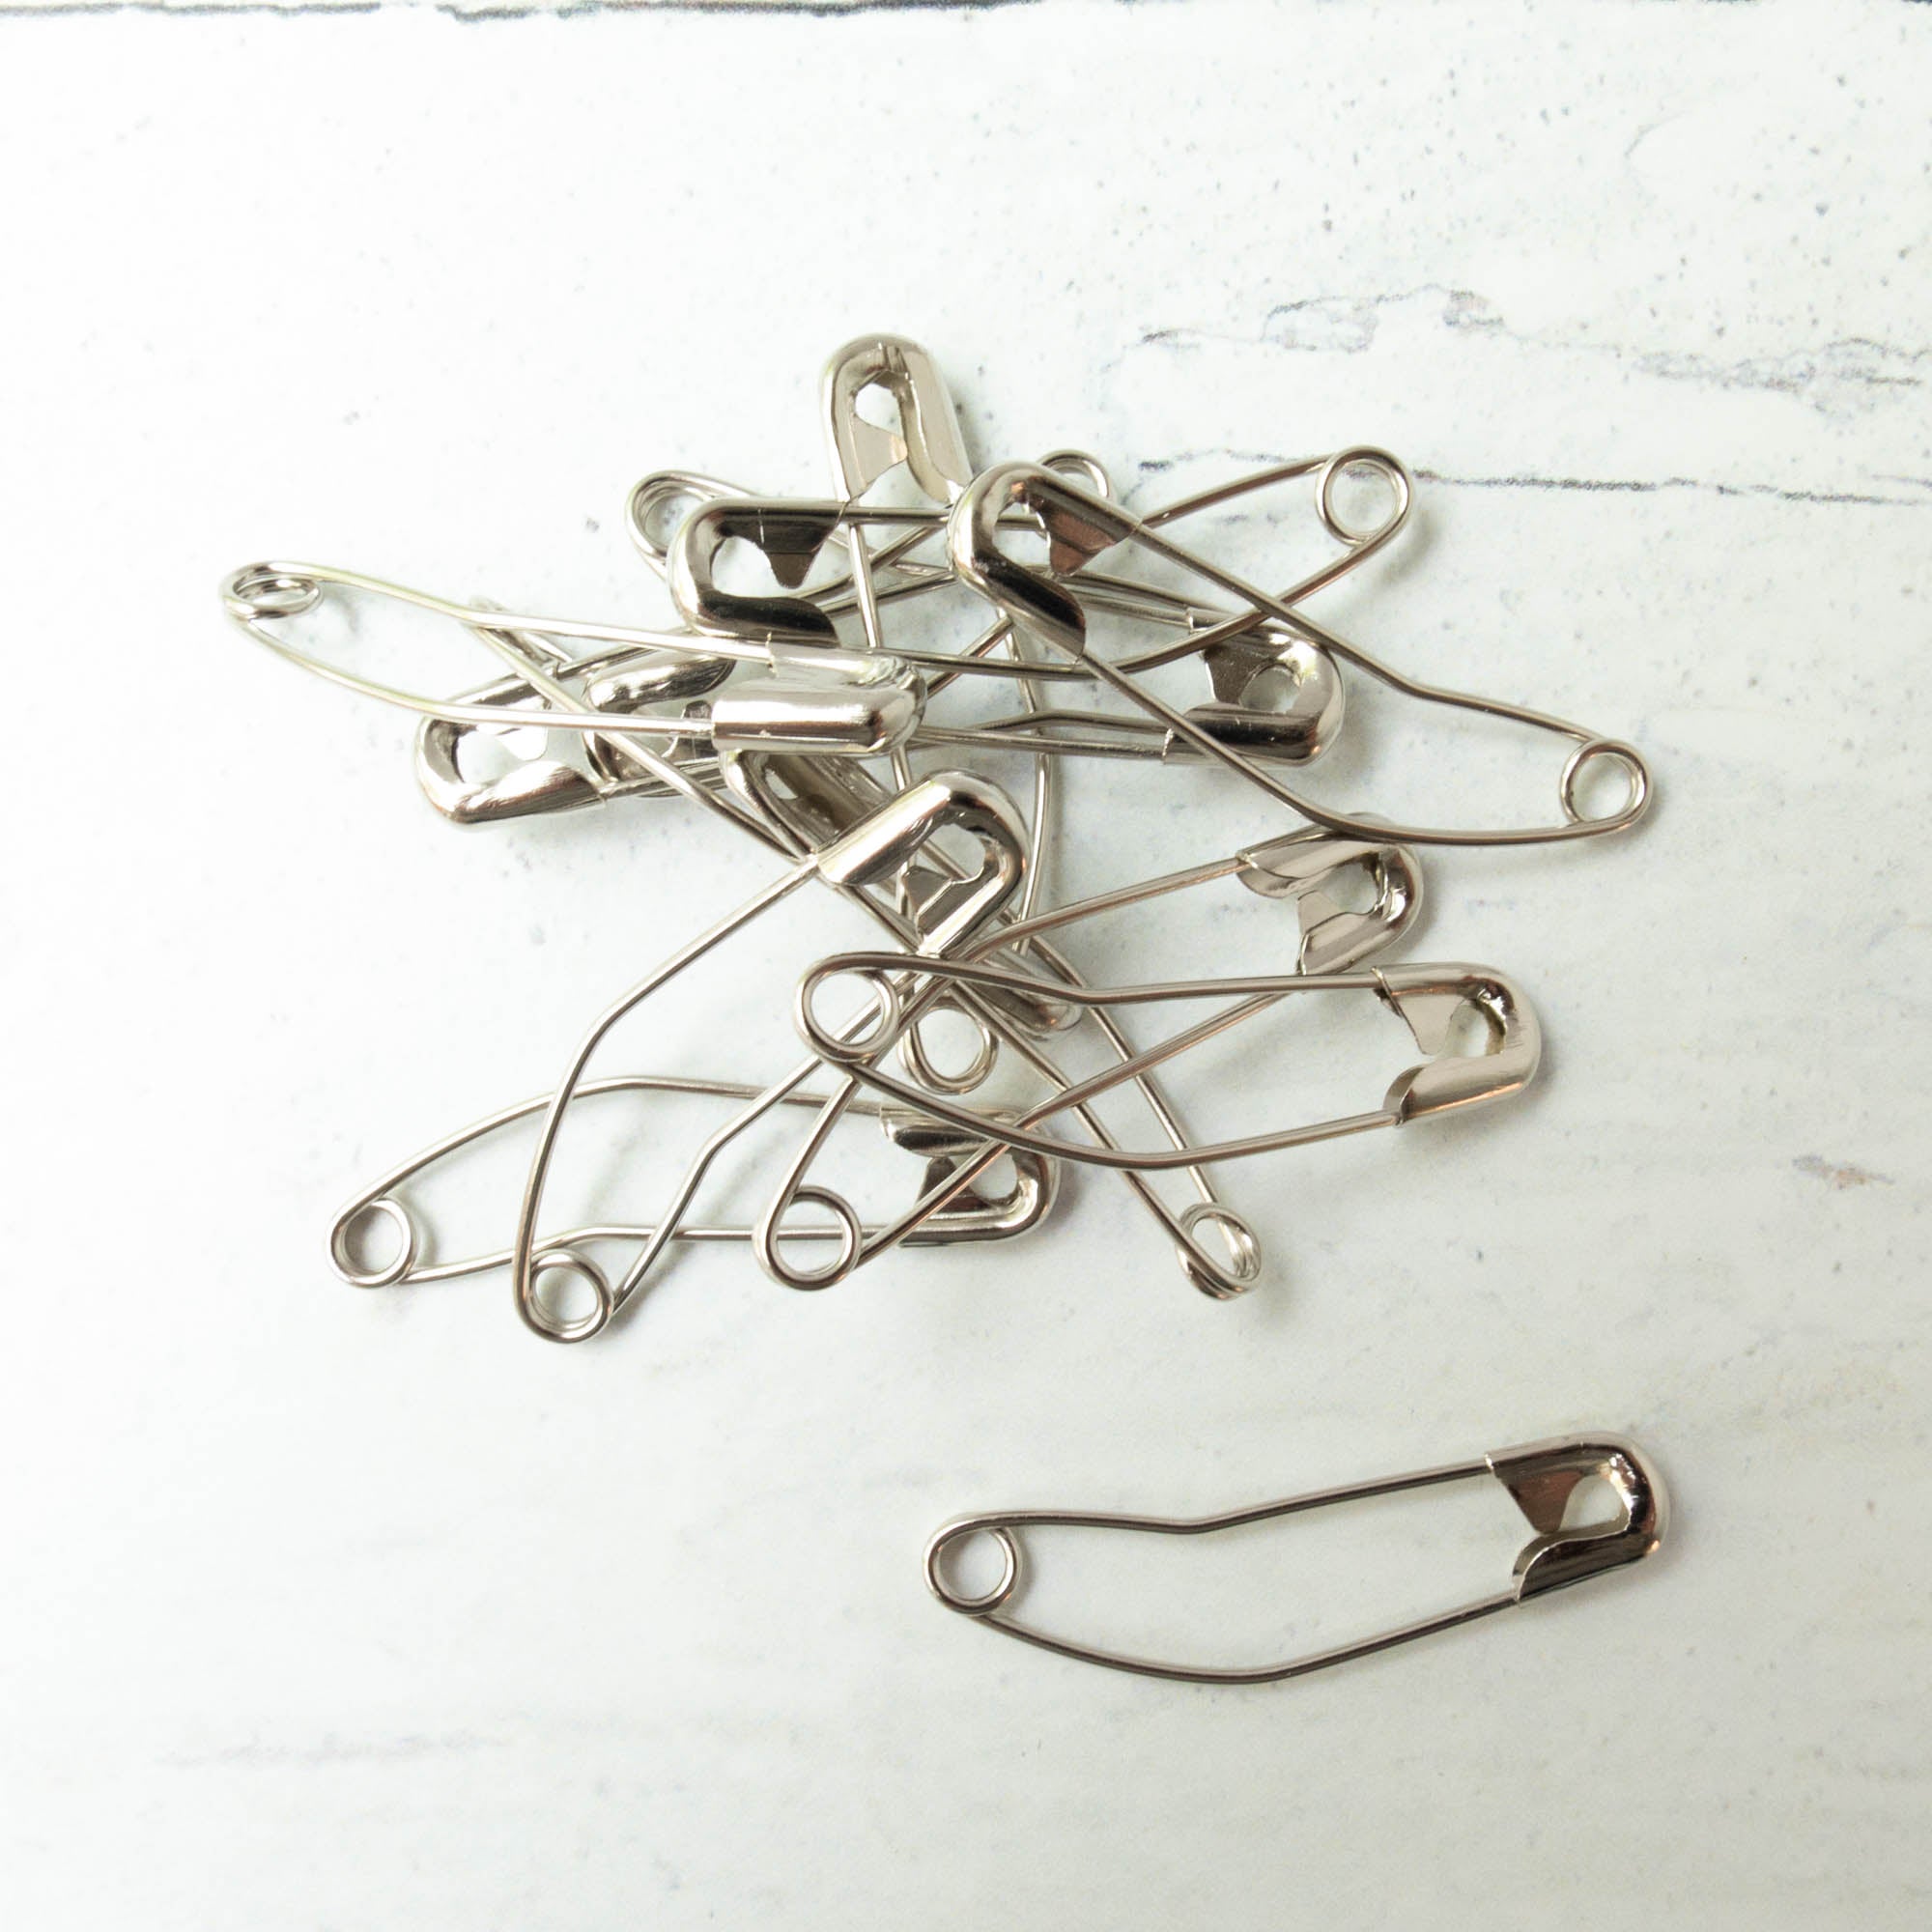 Quilting Safety Pins  Curved Safety Pins for Quilting